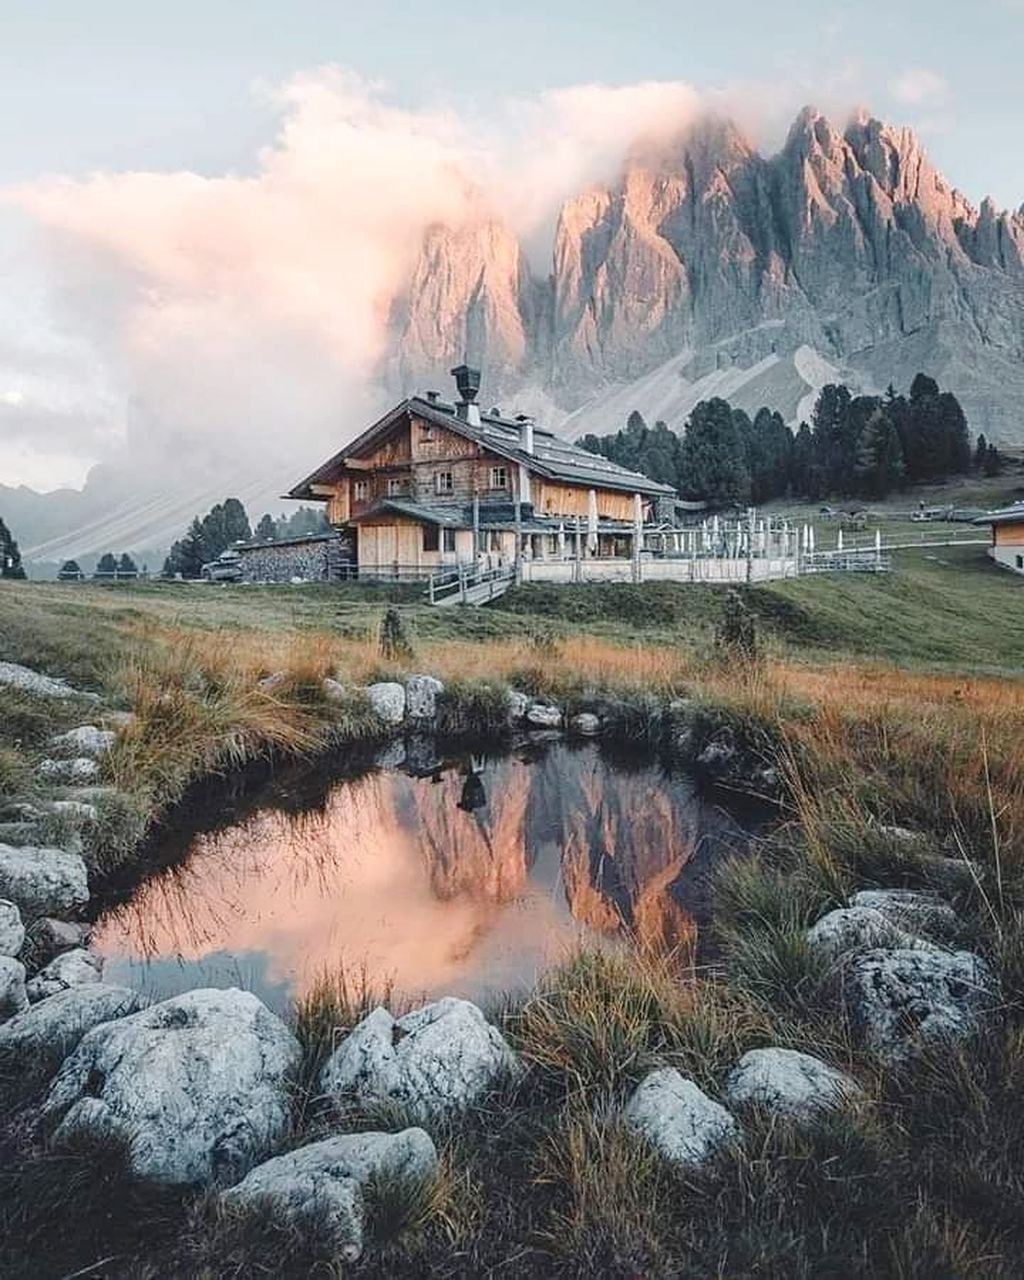 mountain, architecture, landscape, building, built structure, environment, sky, wilderness, nature, building exterior, scenics - nature, cloud, house, water, beauty in nature, land, travel destinations, no people, travel, plant, snow, winter, mountain range, hut, cold temperature, outdoors, rural scene, tourism, residential district, lake, grass, tranquility, non-urban scene, morning, village